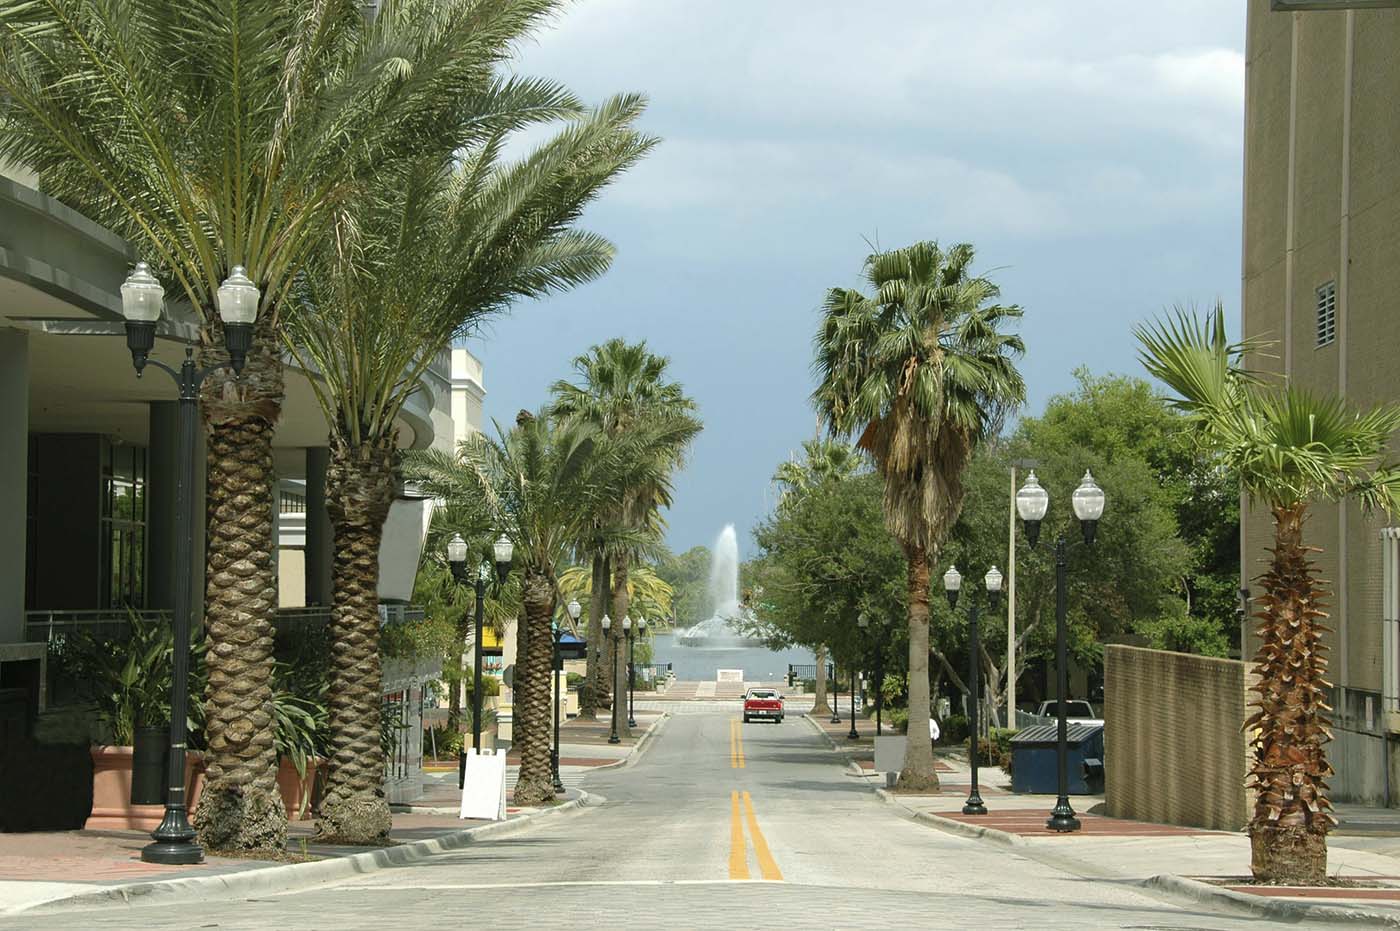 Is Altamonte Springs a Good Place to Live?